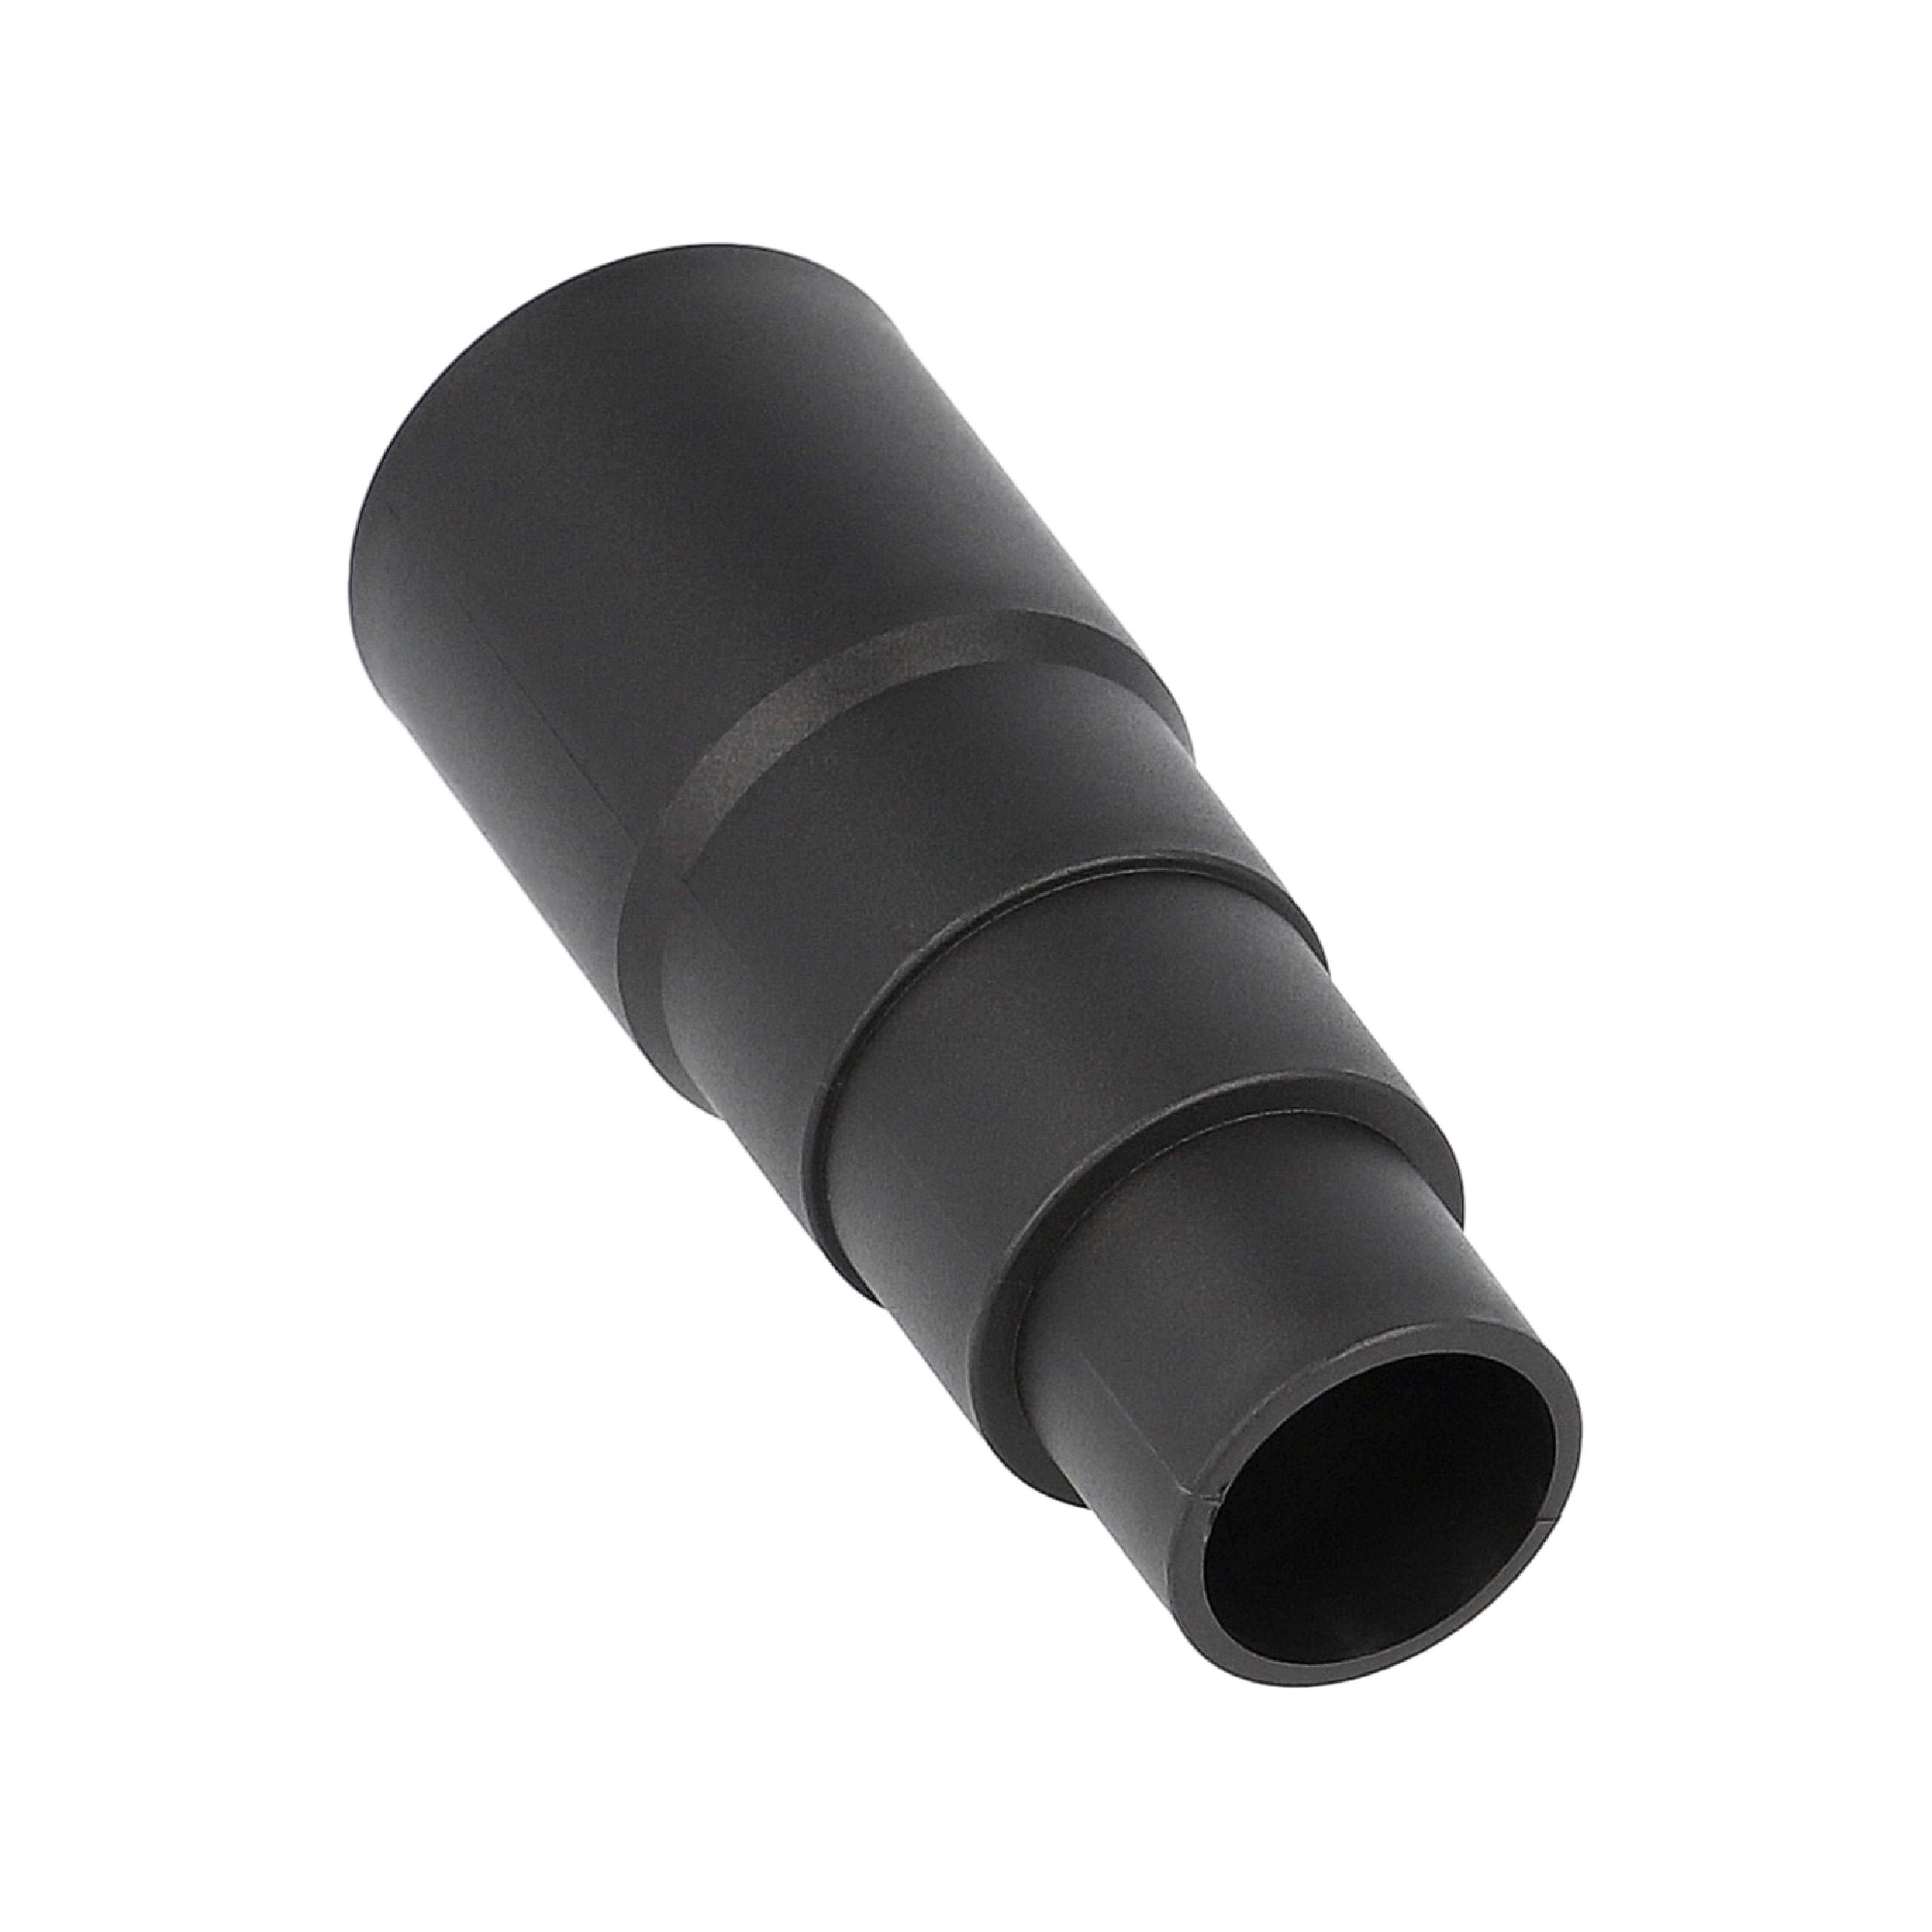 vhbw Vacuum Cleaner Adapter for Wet and Dry Cleaners - Nozzle Adapter for Connecting to Electrical Work Tools,